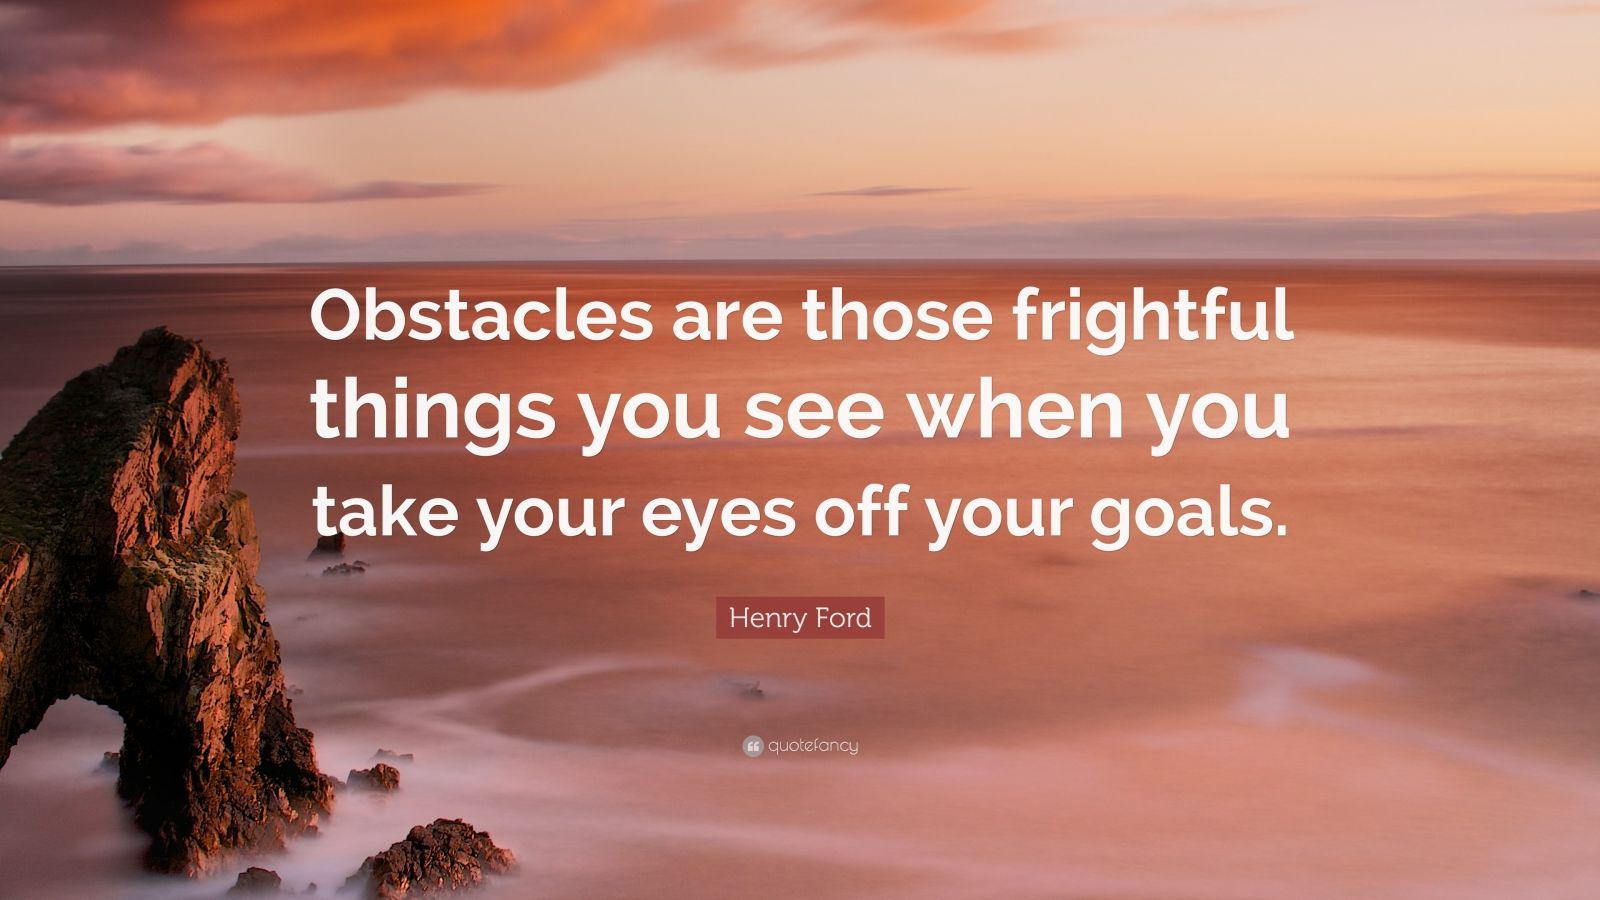 Henry Ford Quote: “Obstacles are those frightful things you see when